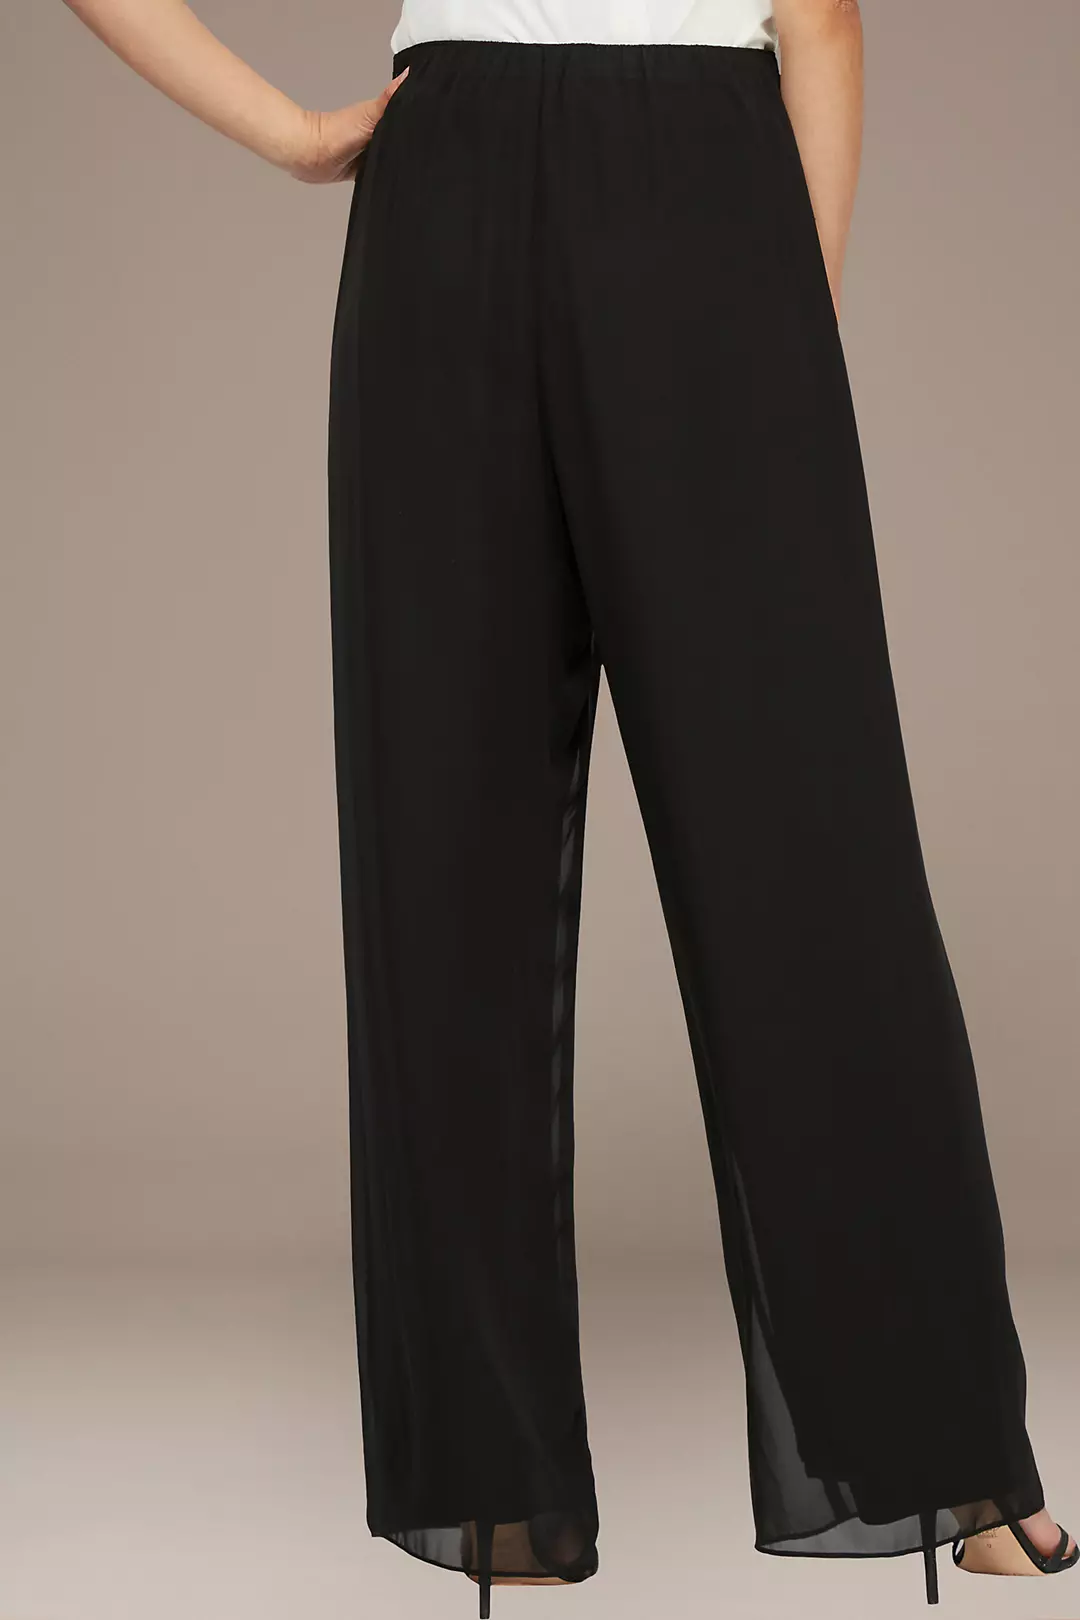 Alex Evenings Special Occasion Chiffon Pull-On Pants